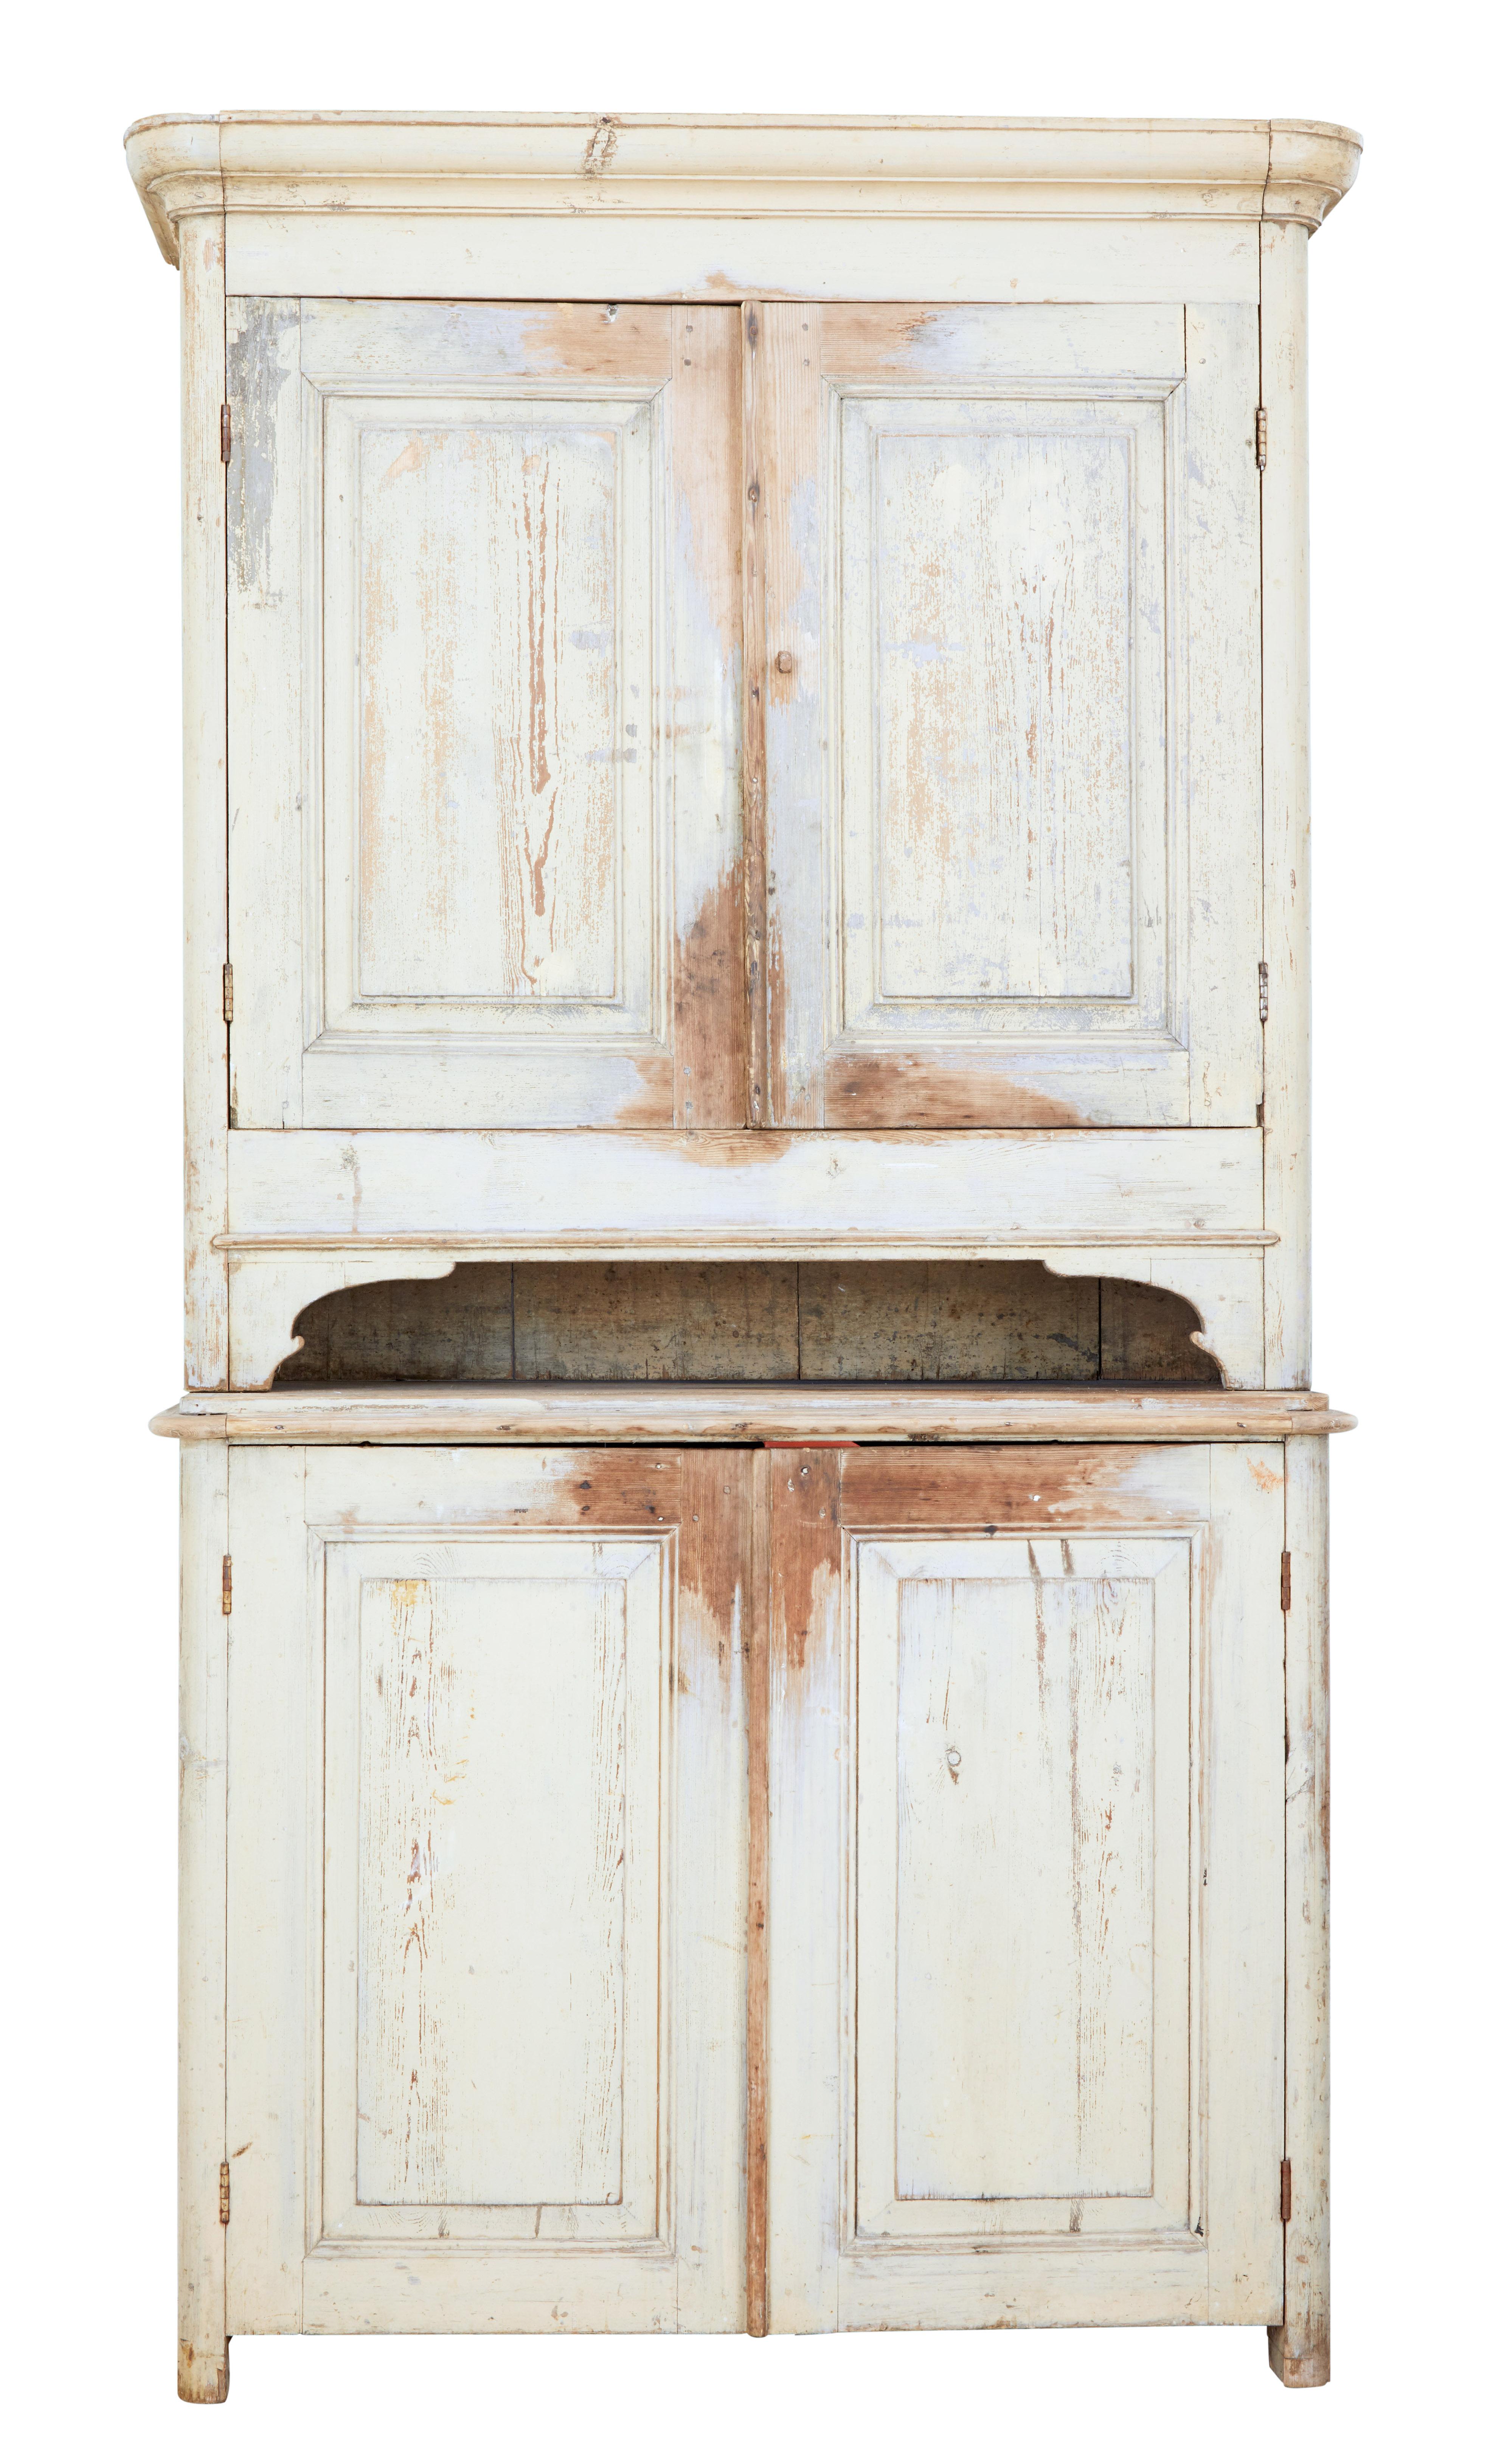 Rustic piece of Swedish pine furniture, circa 1860.

2 part kitchen cupboard still in its original paint. Top section with shaped cornice and double door cupboard containing 2 fixed shelves. Further storage for jars below the top cupboard. Bottom